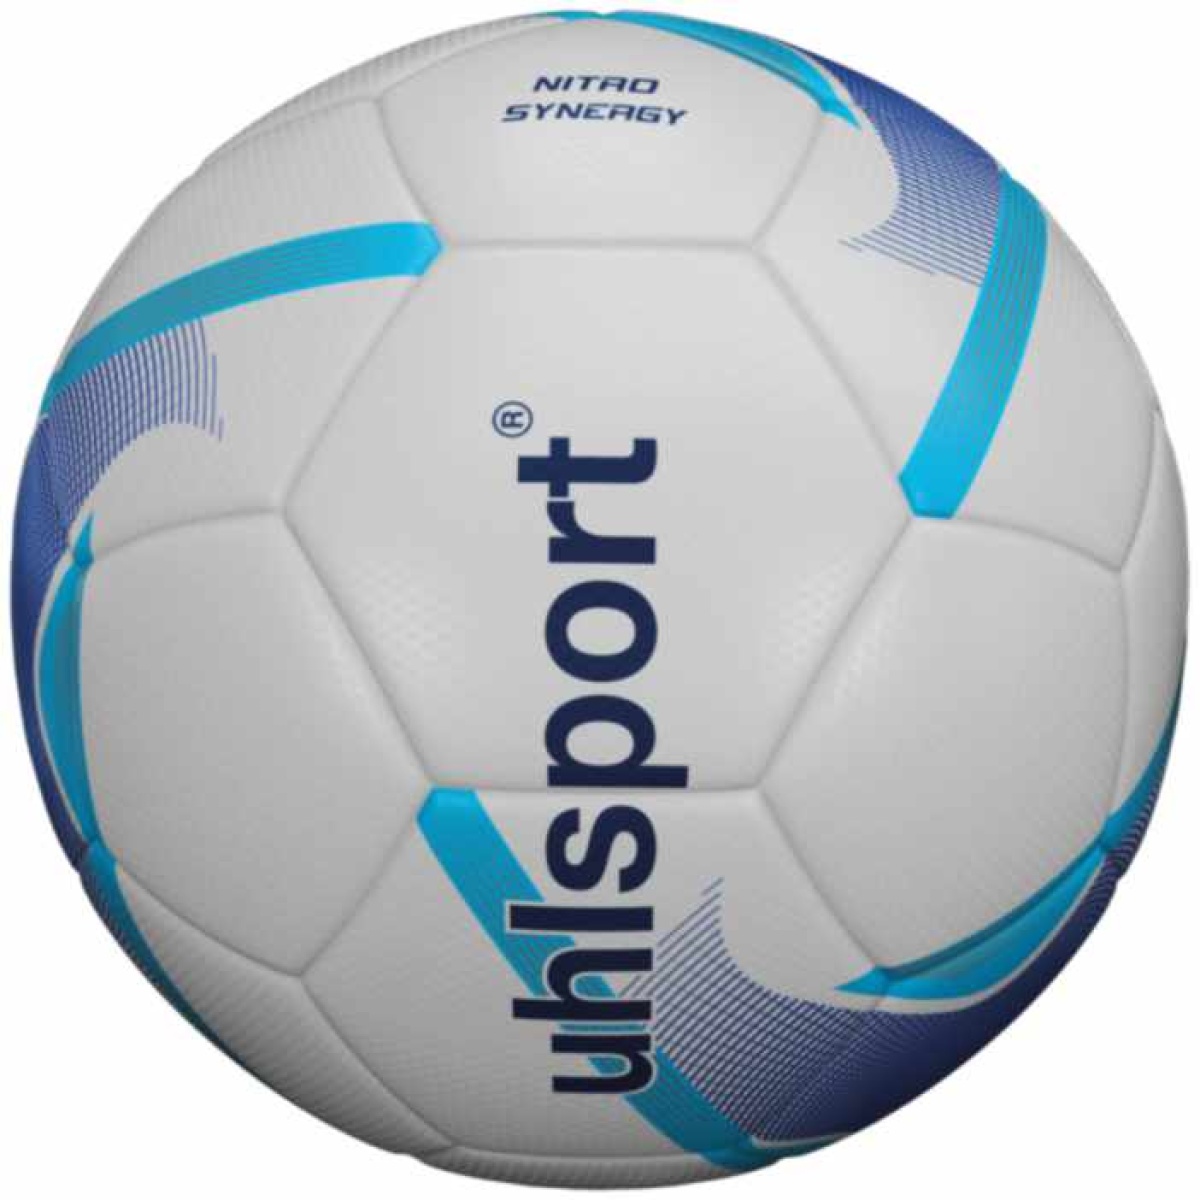 Accessory - Uhlsport Synergy Match Ball, Canvey Island Youth FC, Canvey Island Ladies FC, Canvey Island United FC, Rayleigh FC, Linford Wanderers FC, Essex Comets FC, Supreme Youth FC, Thundersley Rovers FC, Essex Royals FC, Benfleet Villa FC, Benfleet FC, Island Boys FC, Rayleigh Town FC